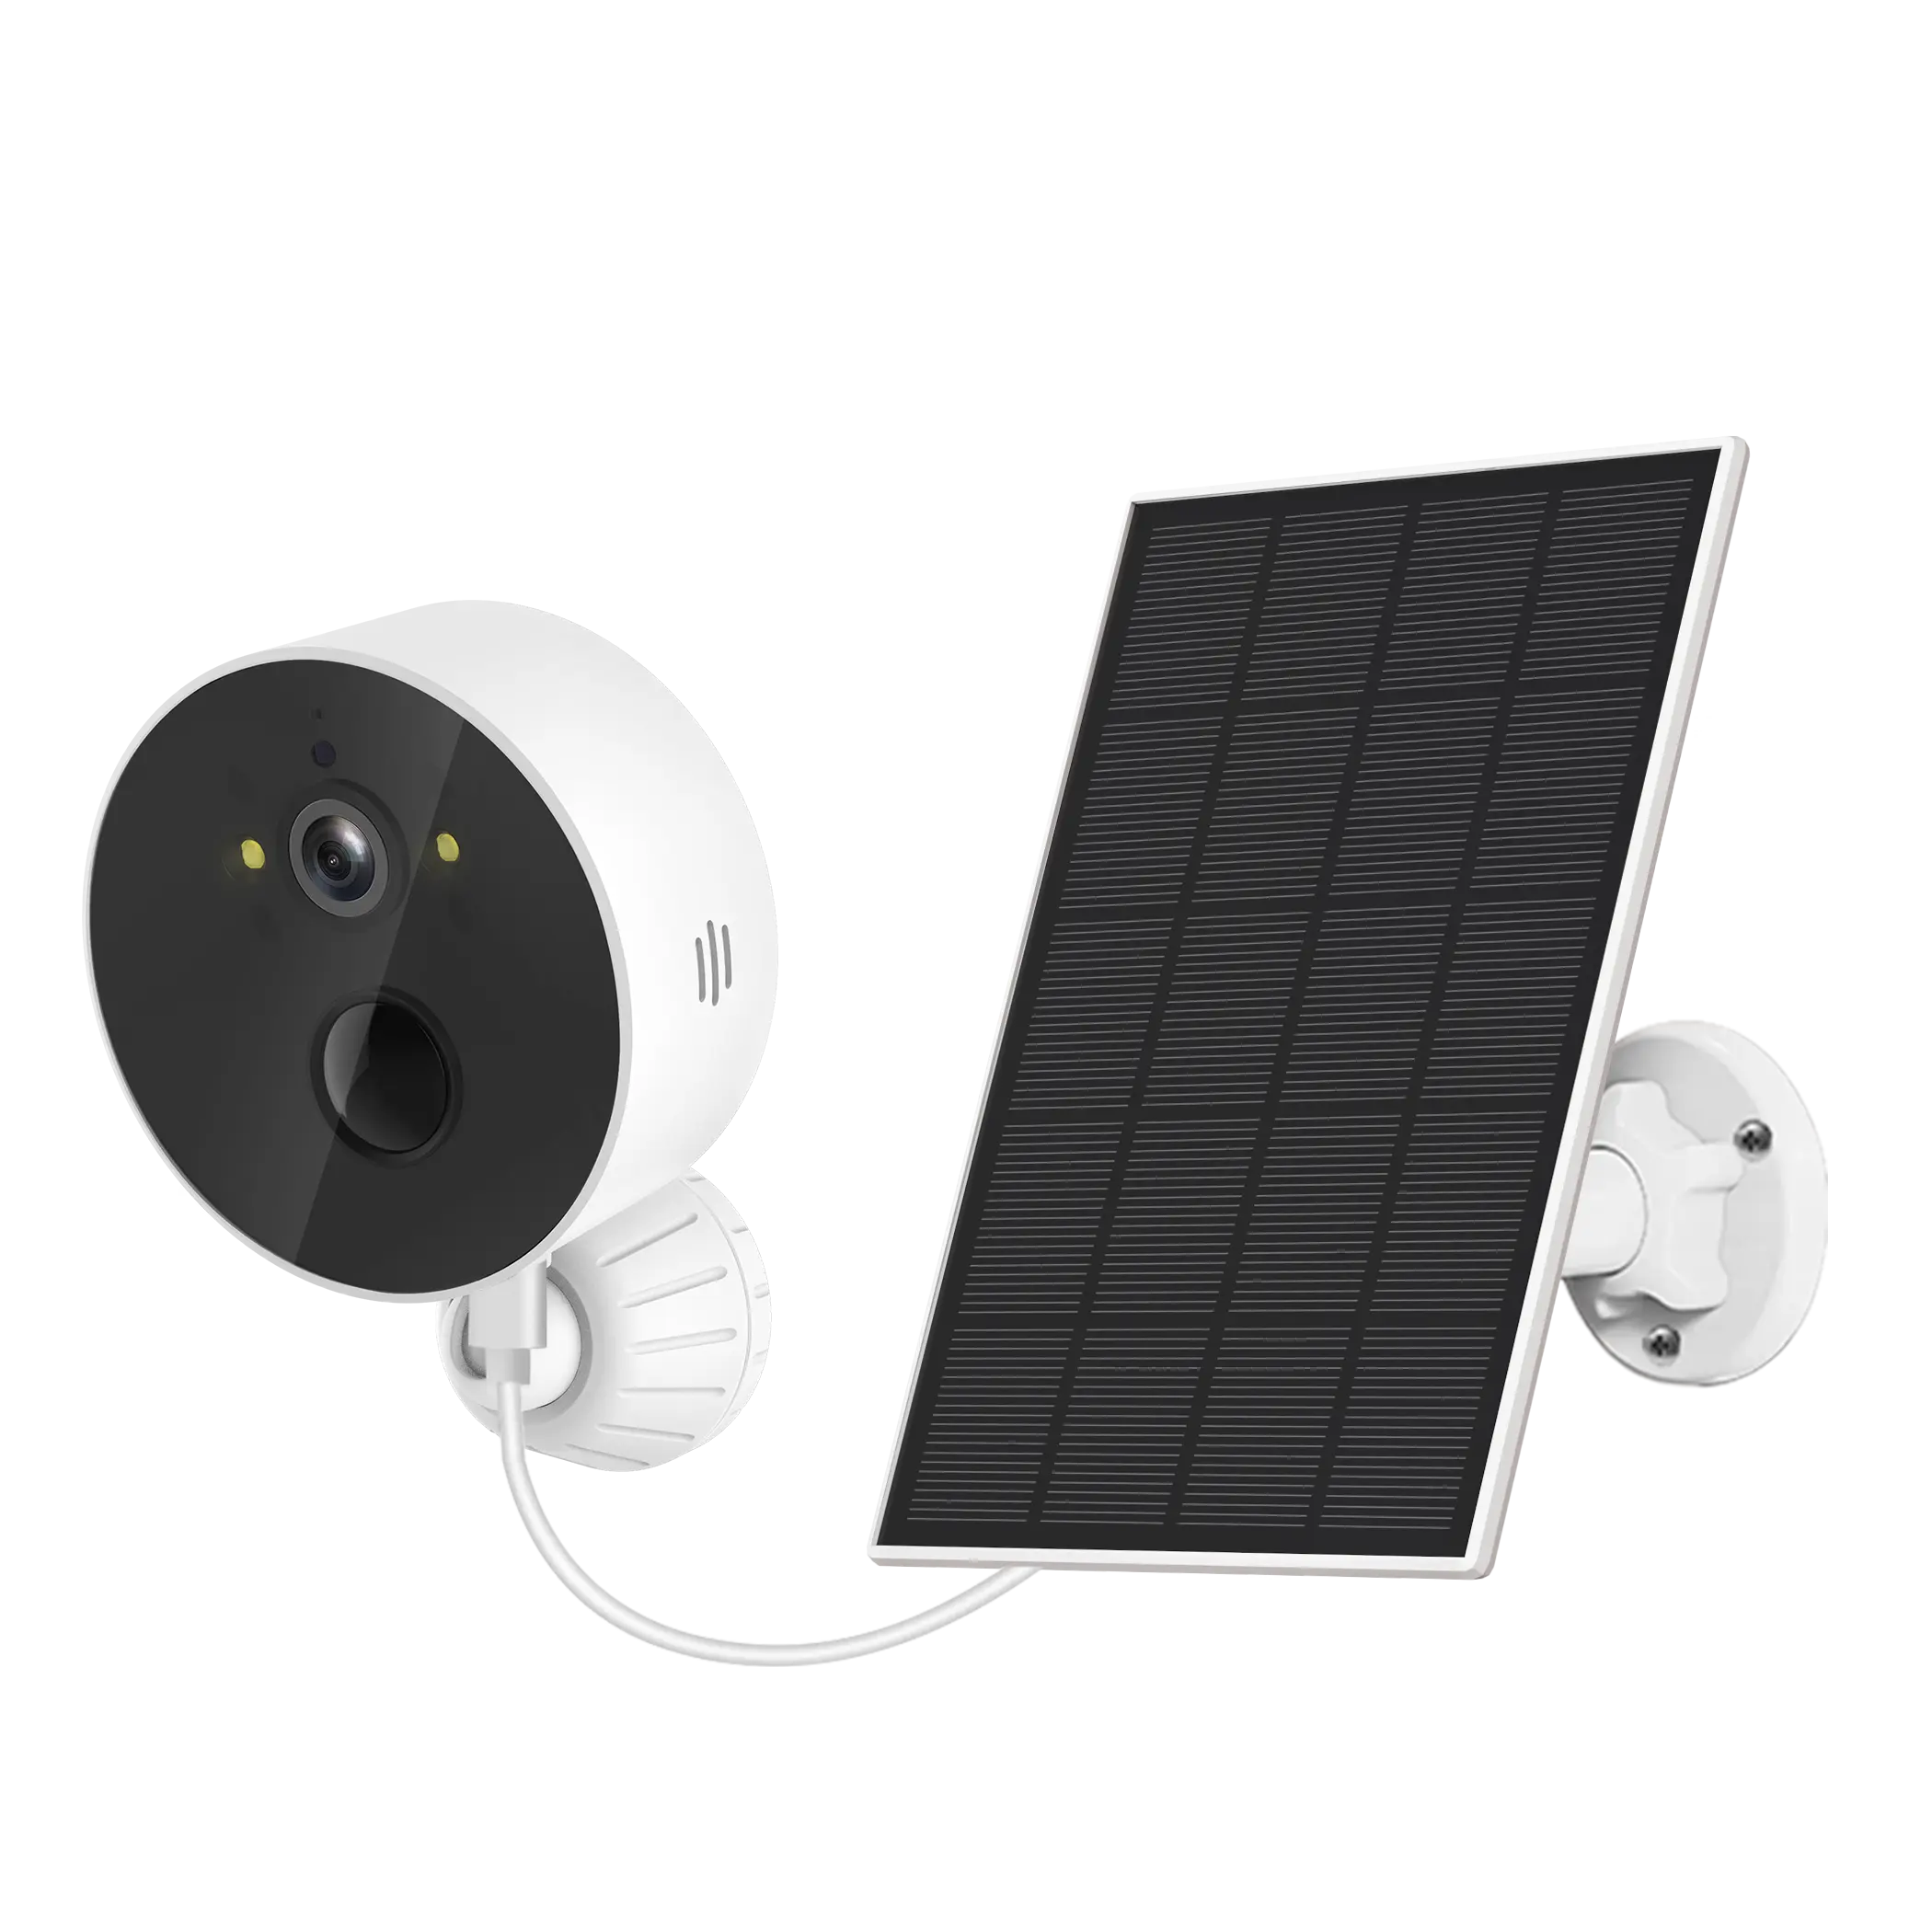 Outdoor Indoor night vision online wifi ip hd pet wi fi camera home wireless security 360 ptz surveil solar cctv camera system